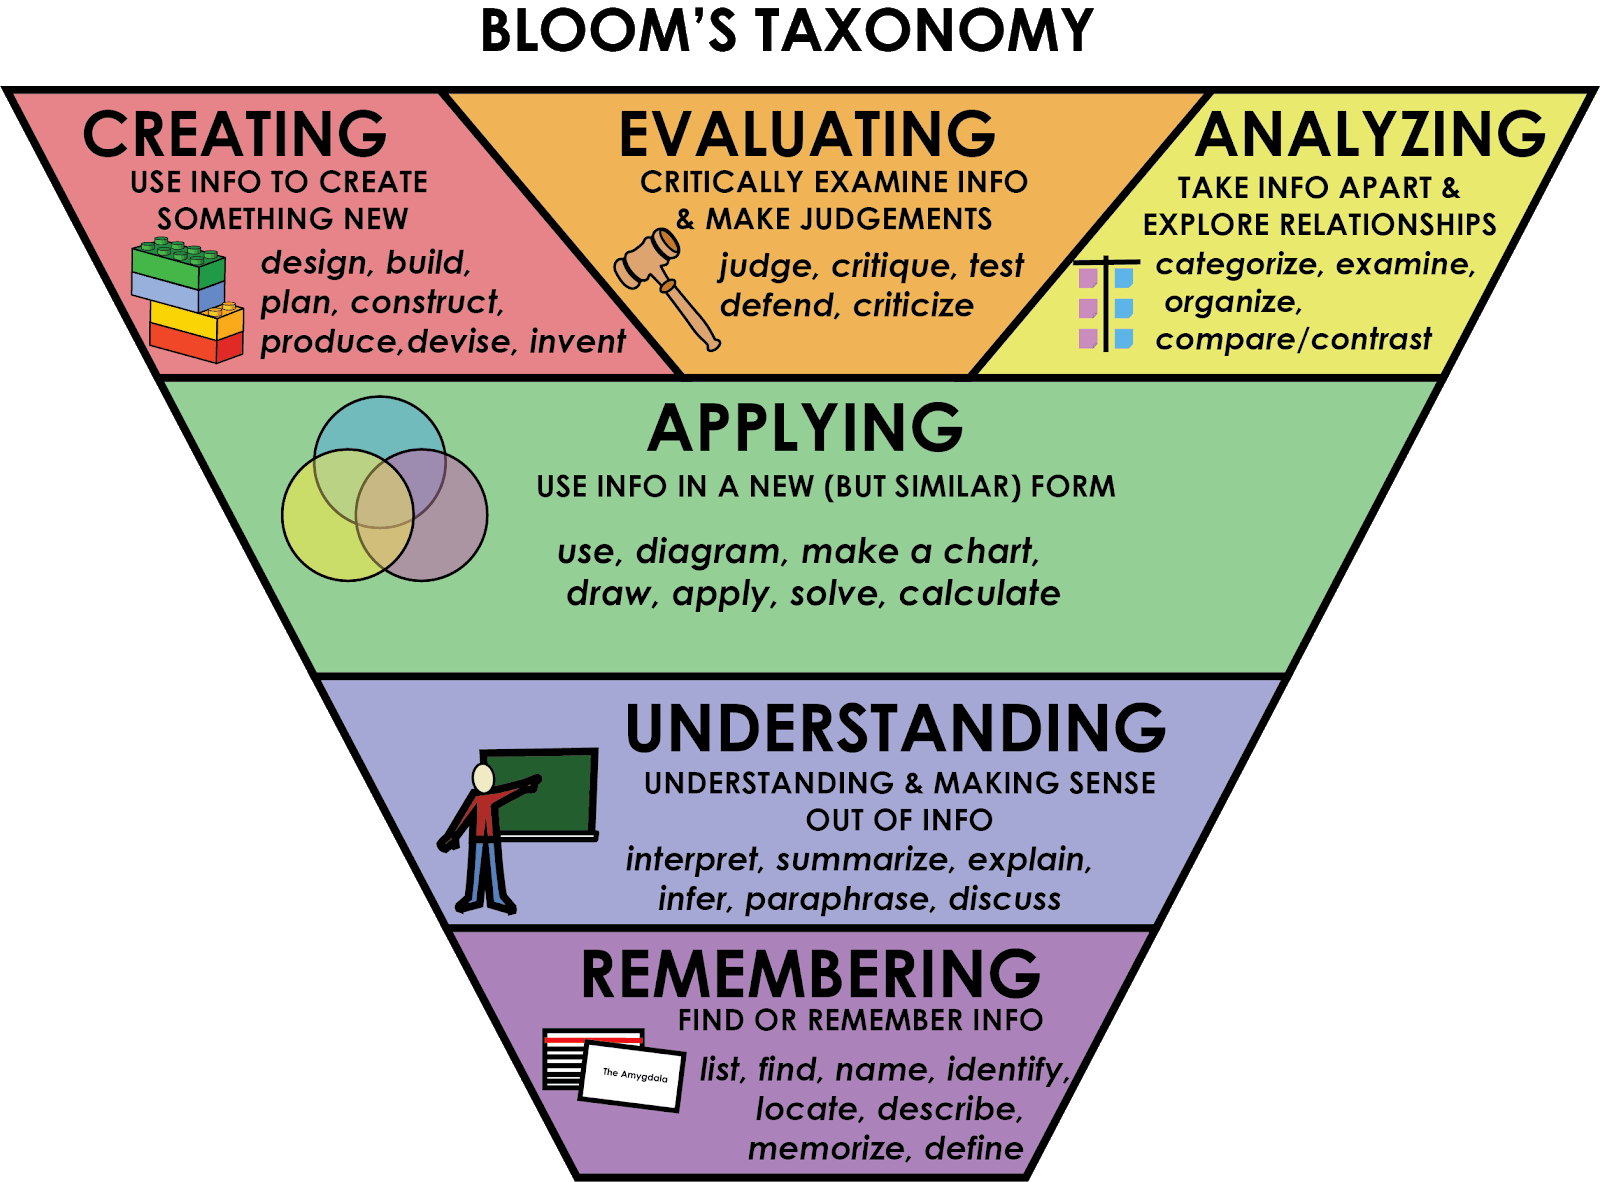 encouragement of higher order thinking and problem solving skills